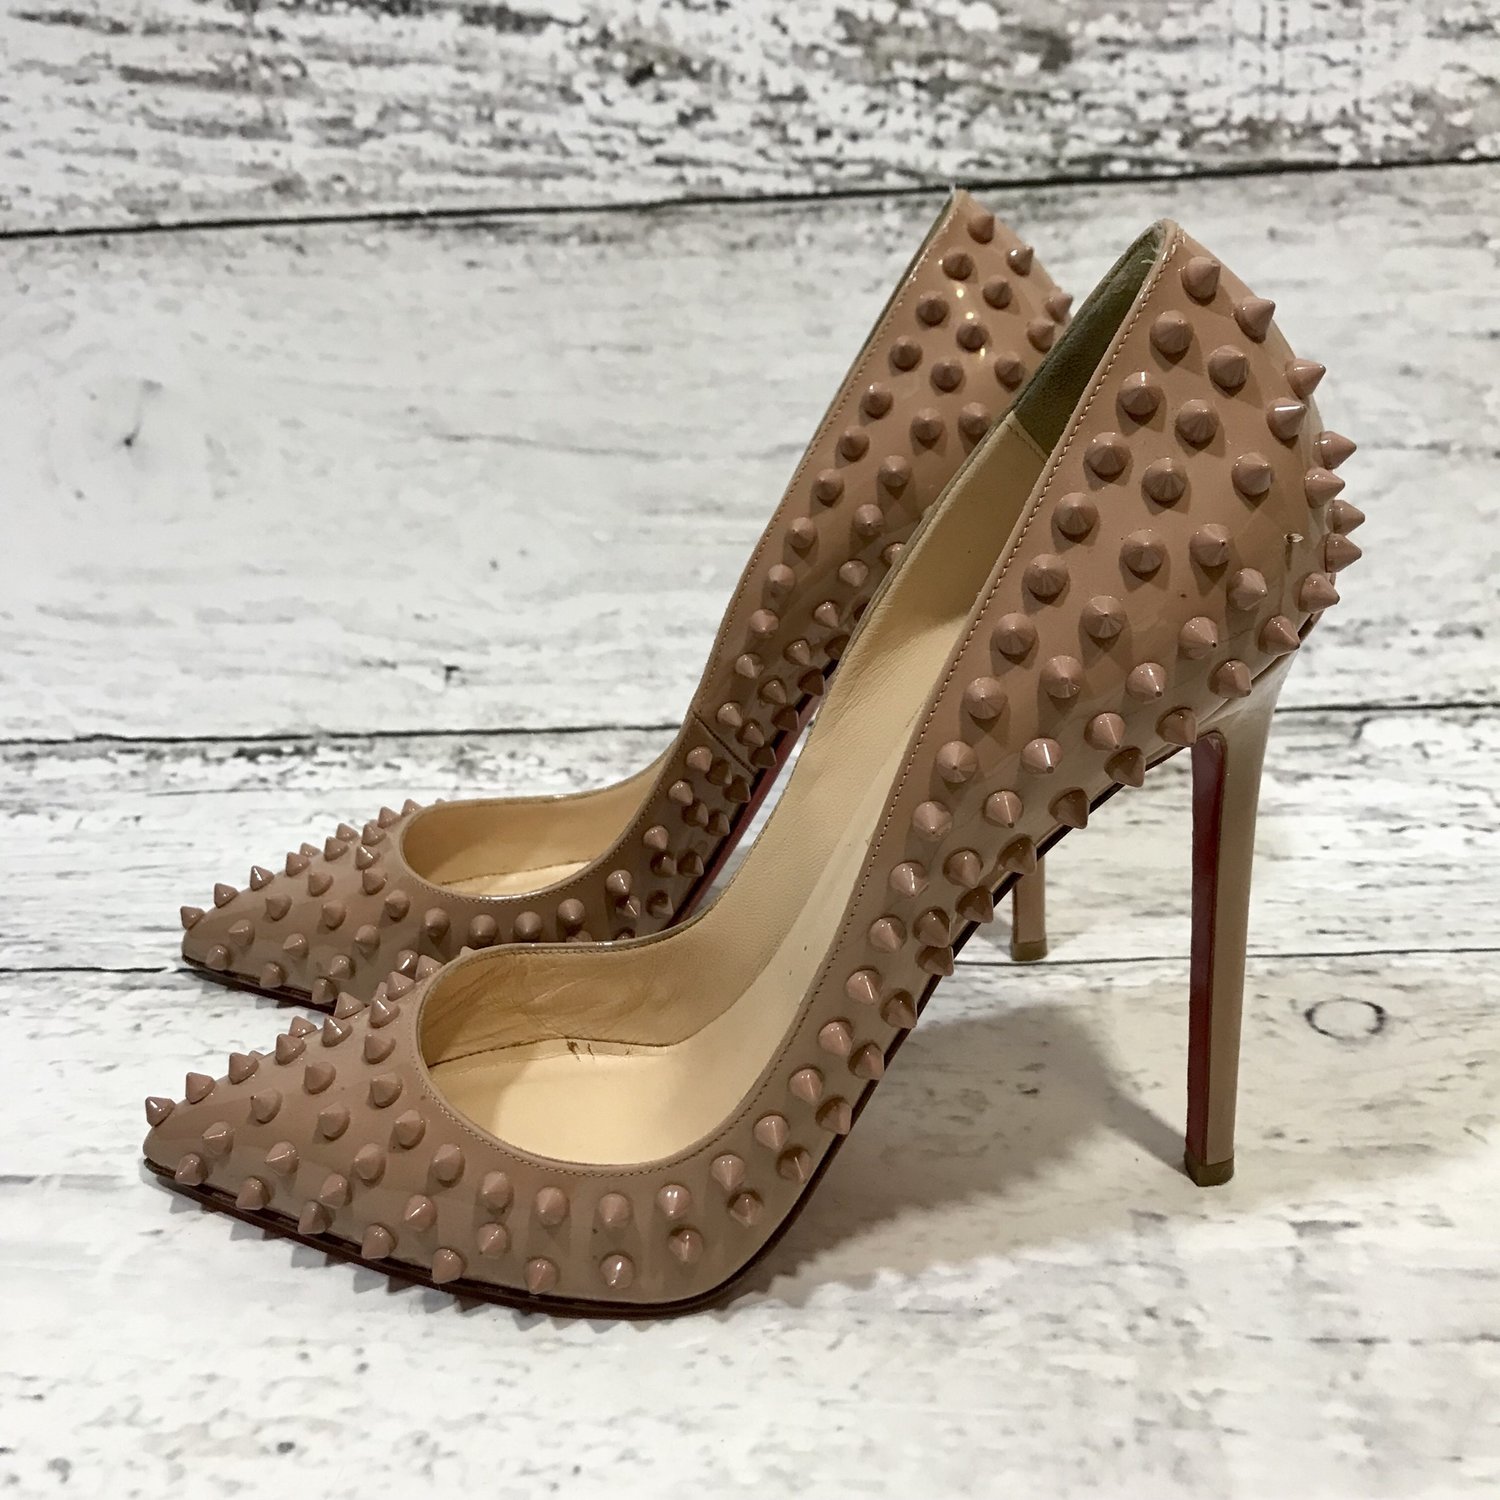 Christian Louboutin Pigalle Spikes Studded High Heels